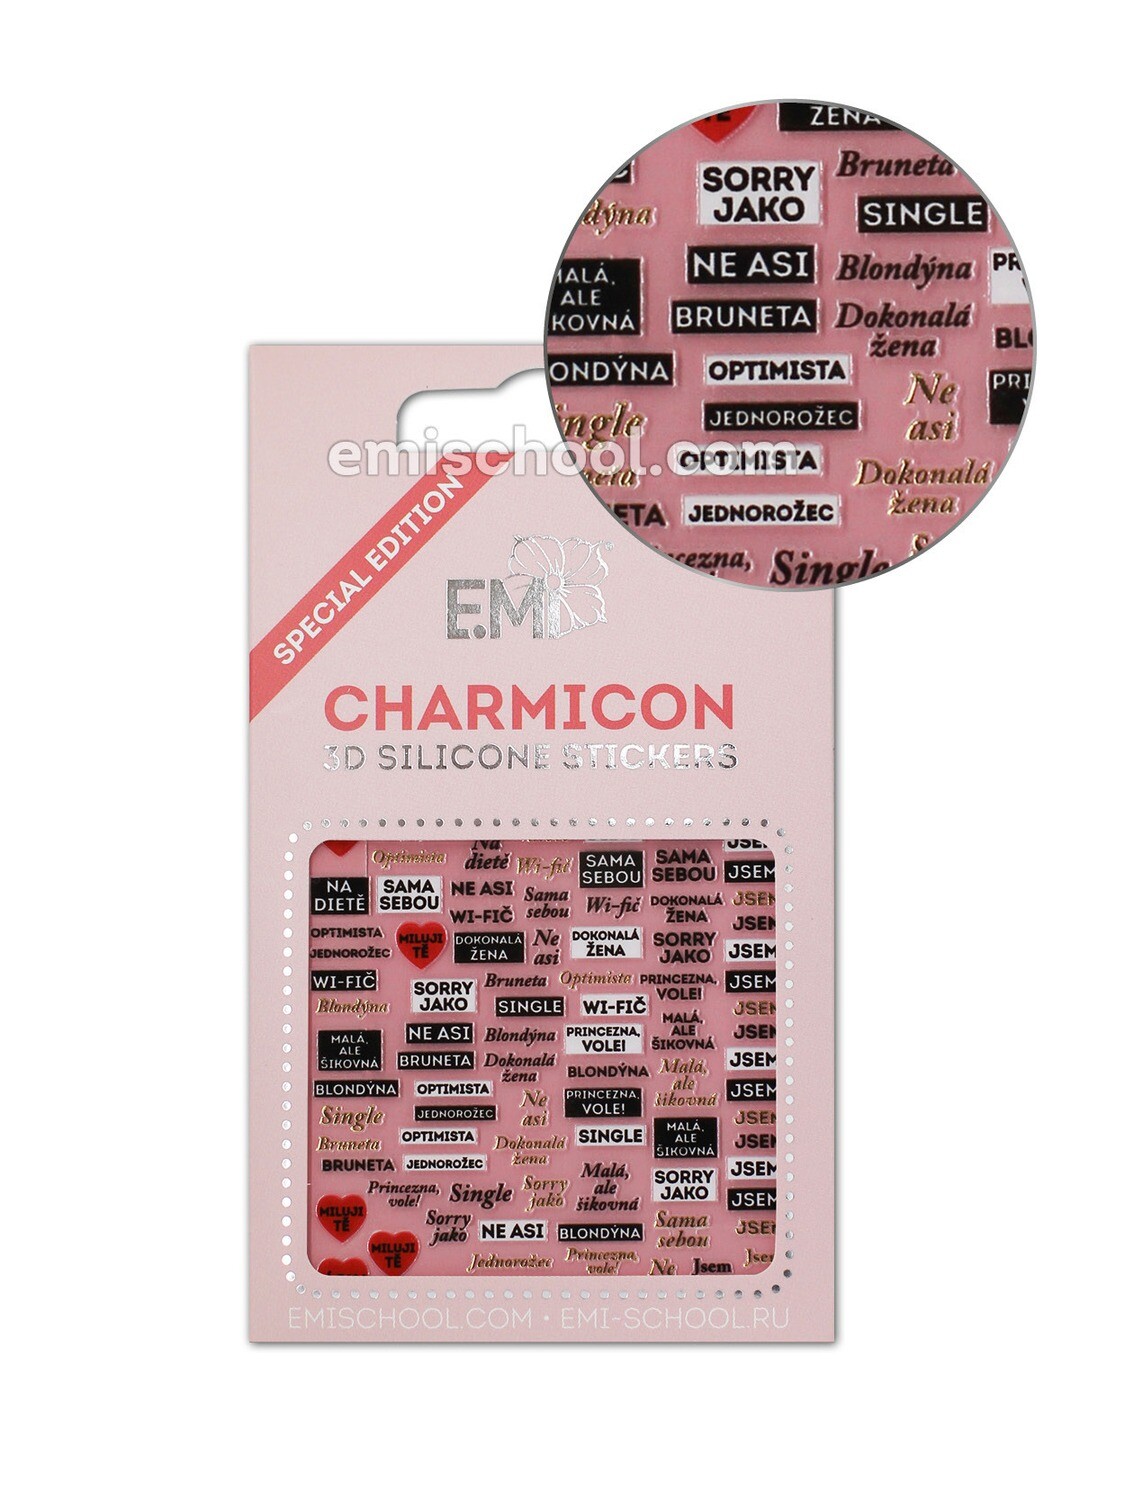 Charmicon 3D Silicone Stickers Czech 1